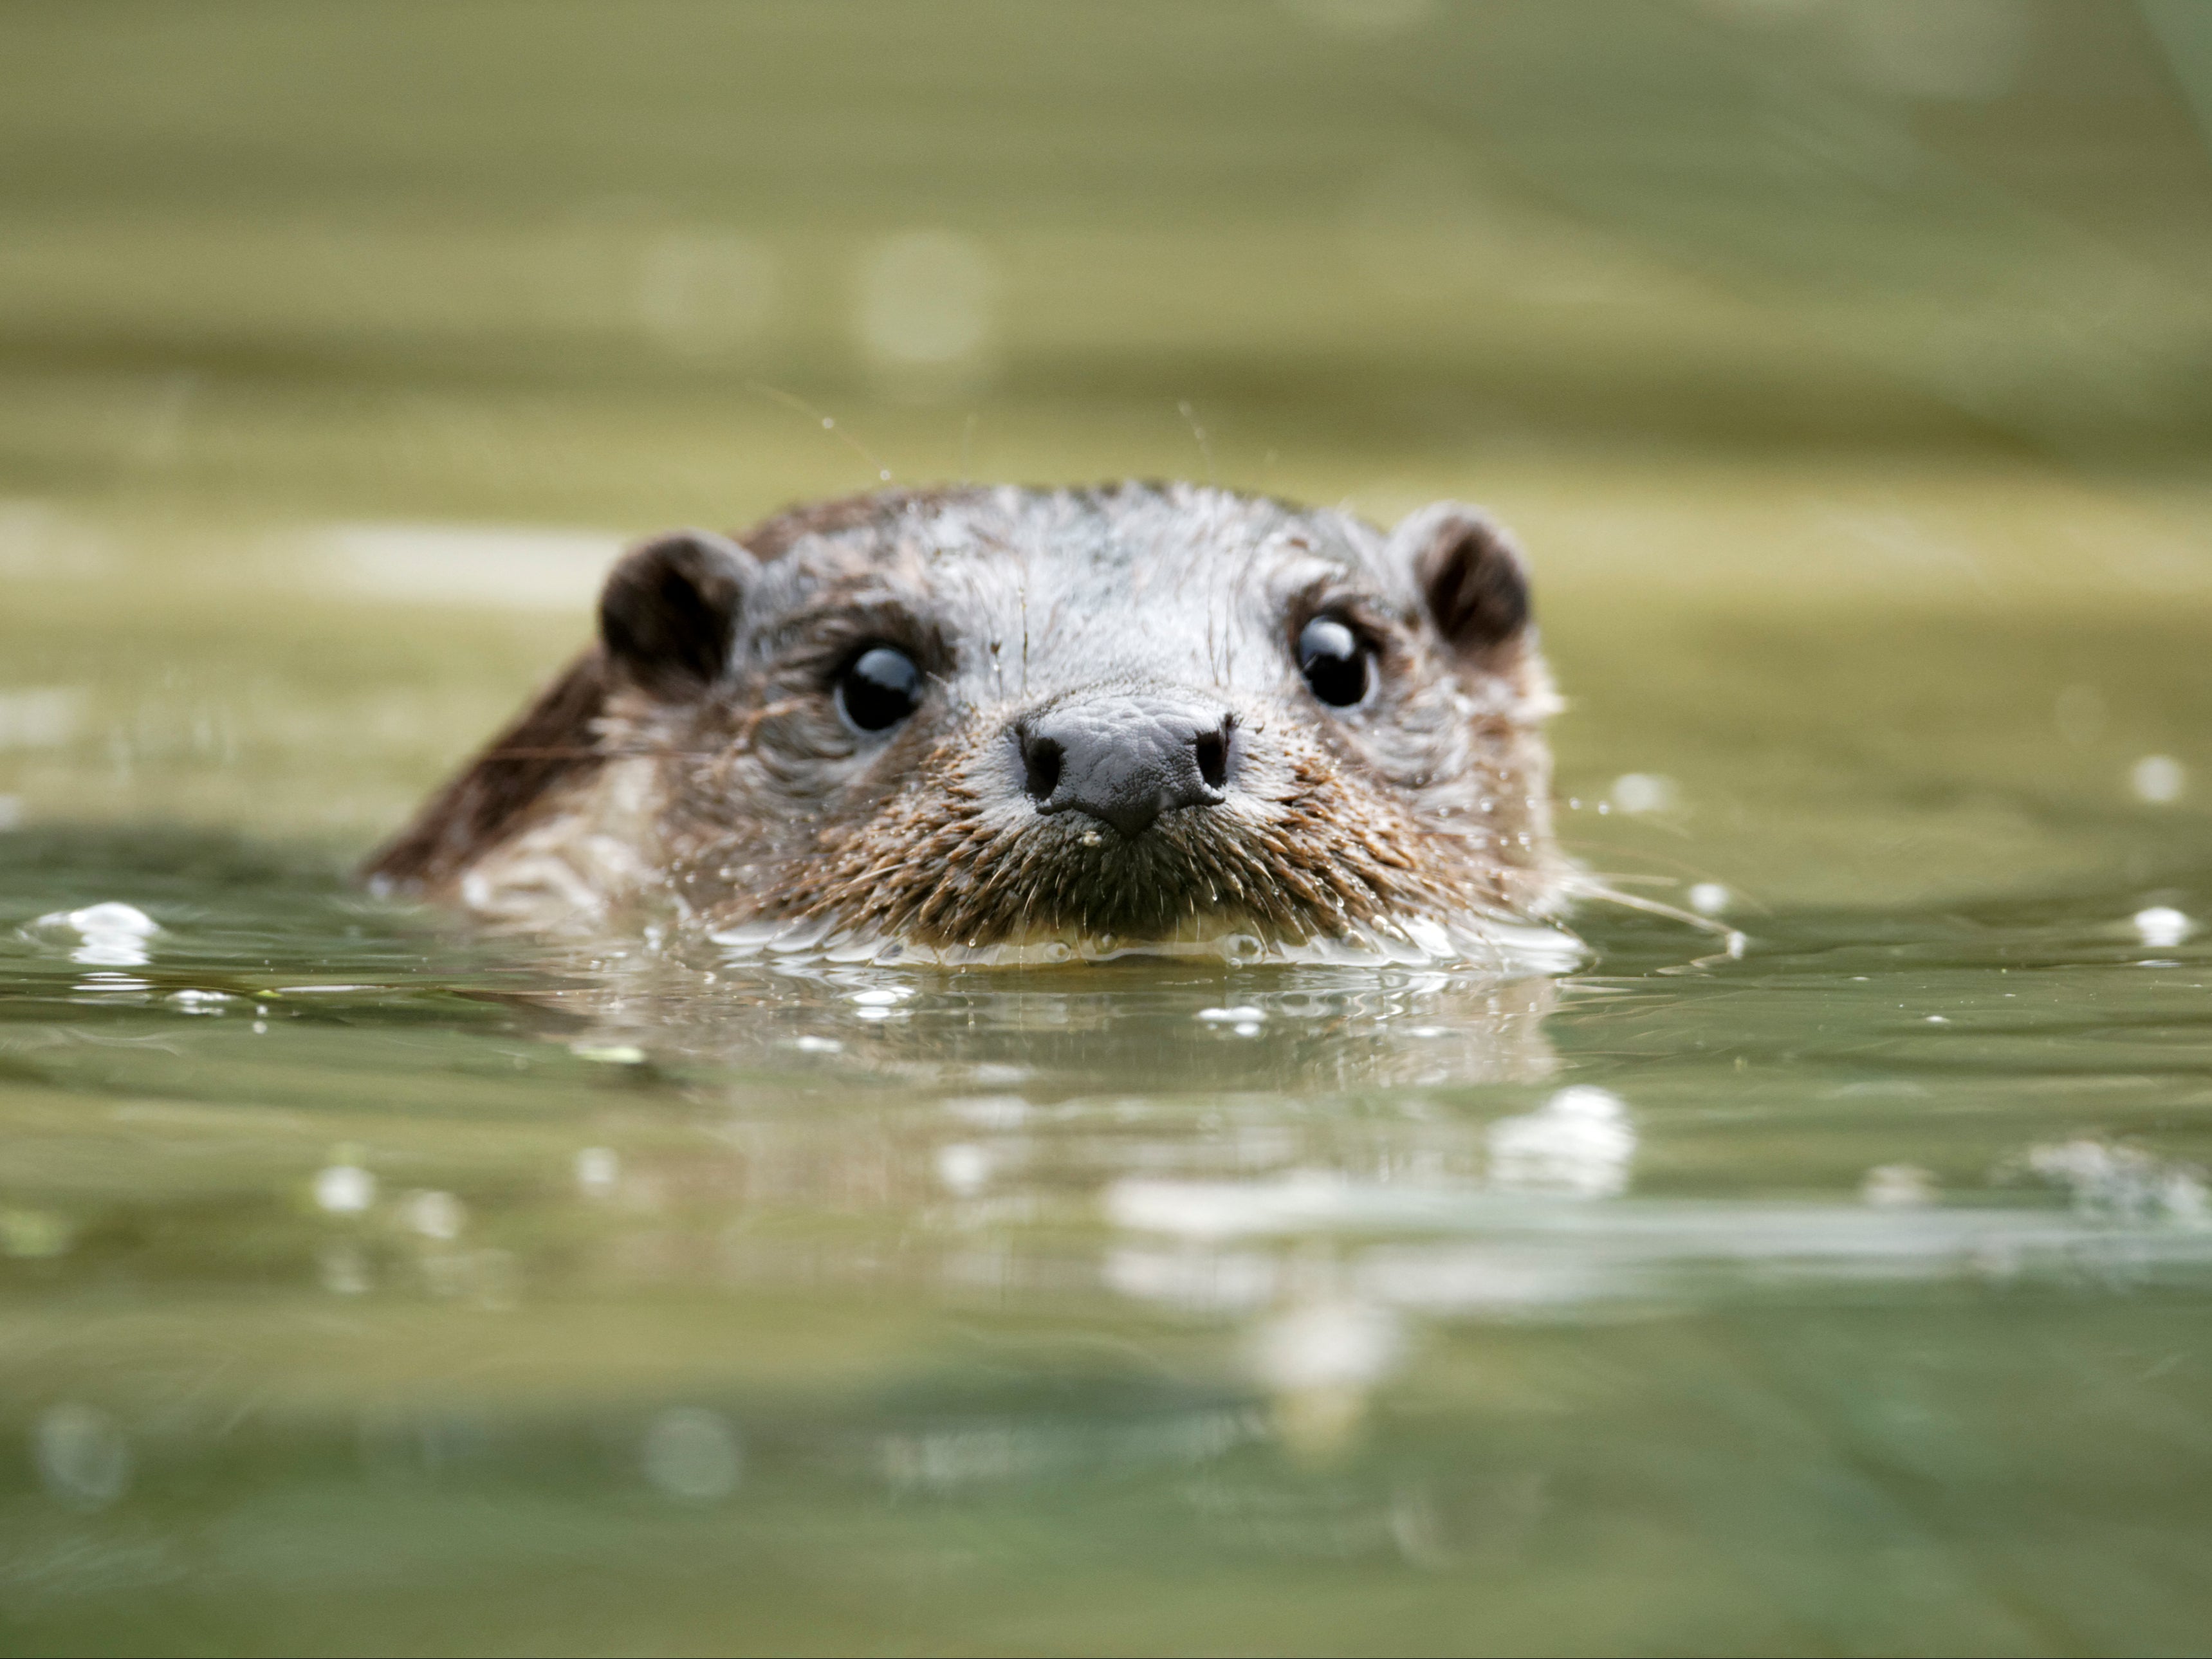 ‘Forever chemicals’ have been detected in otters in a new study